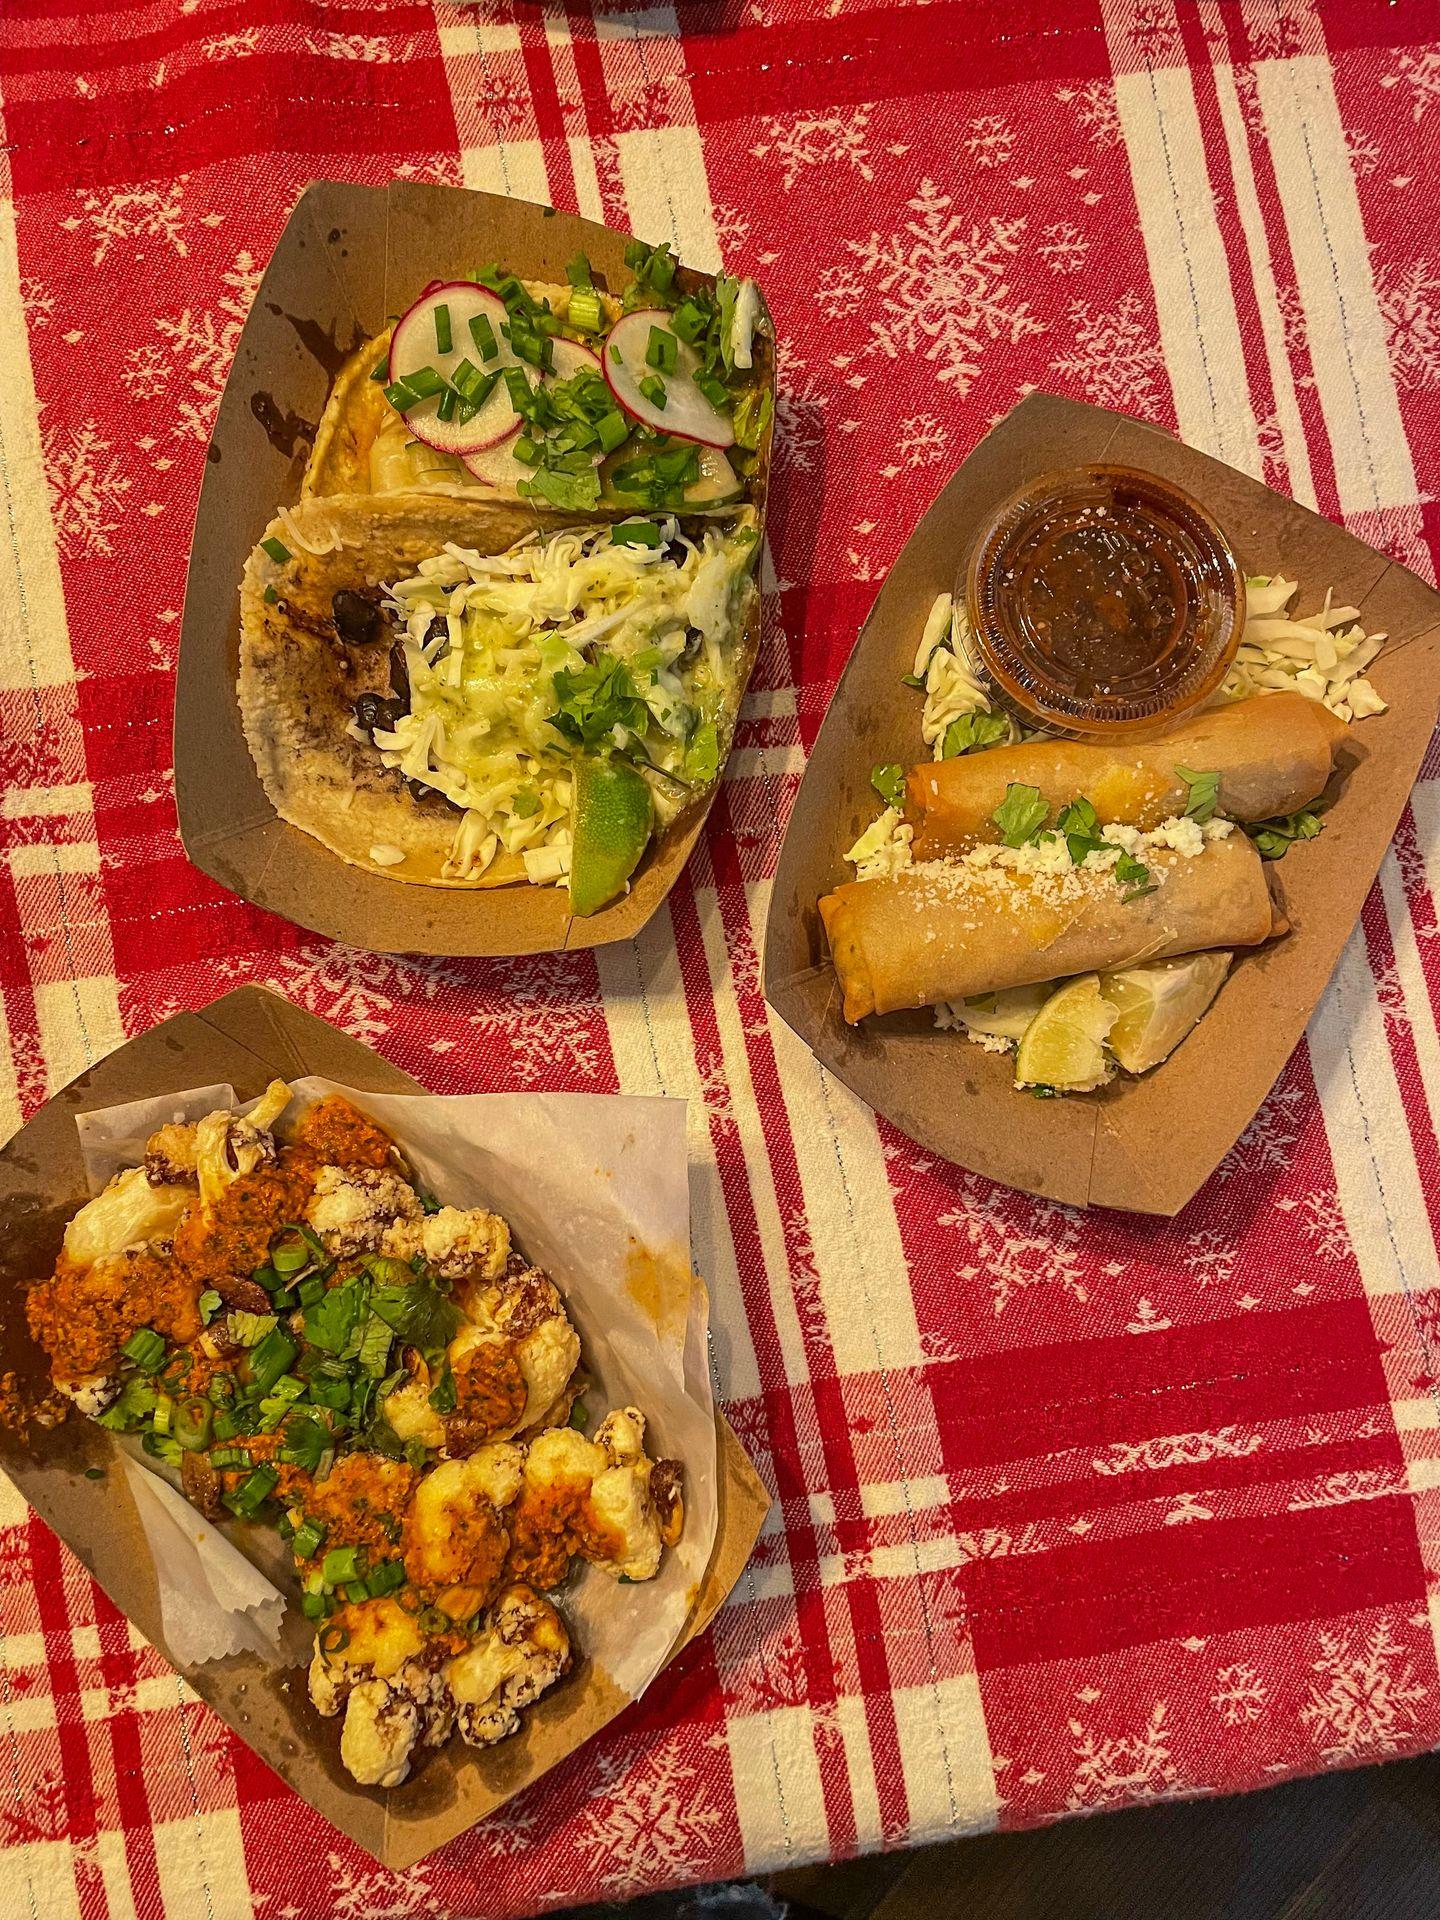 Three paper plates with cauliflower, egg rolls and tacos from Lloyd Taco Factory.